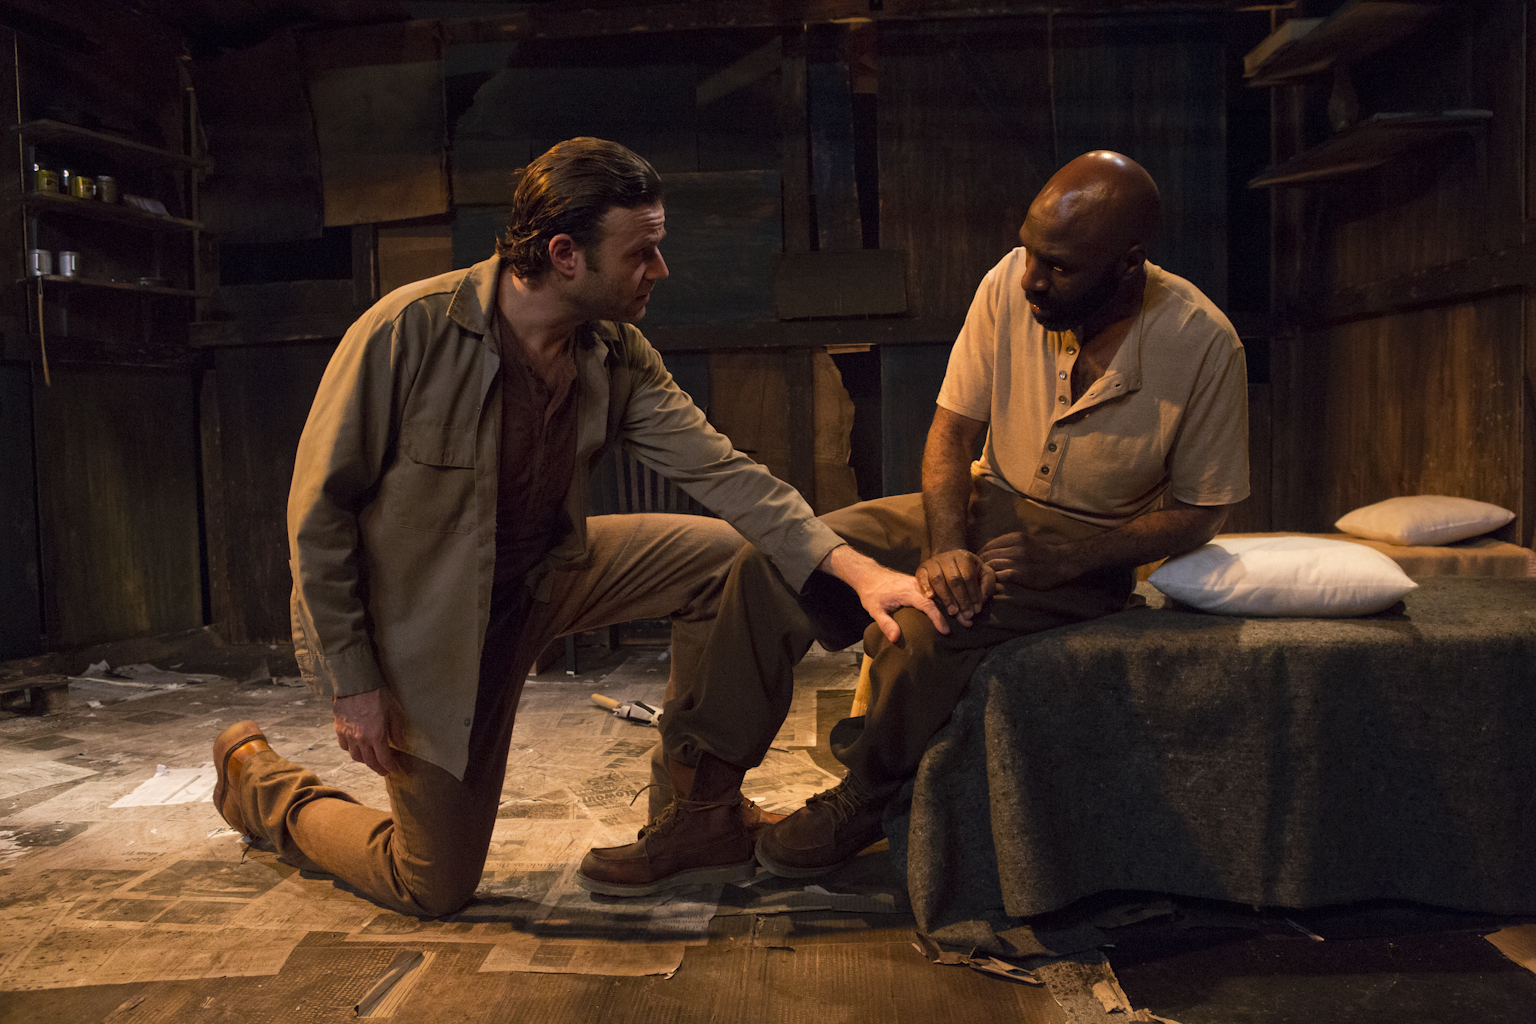 Eric Scott Gould with Anthony Mark Barrow in Athol Fugard's, 